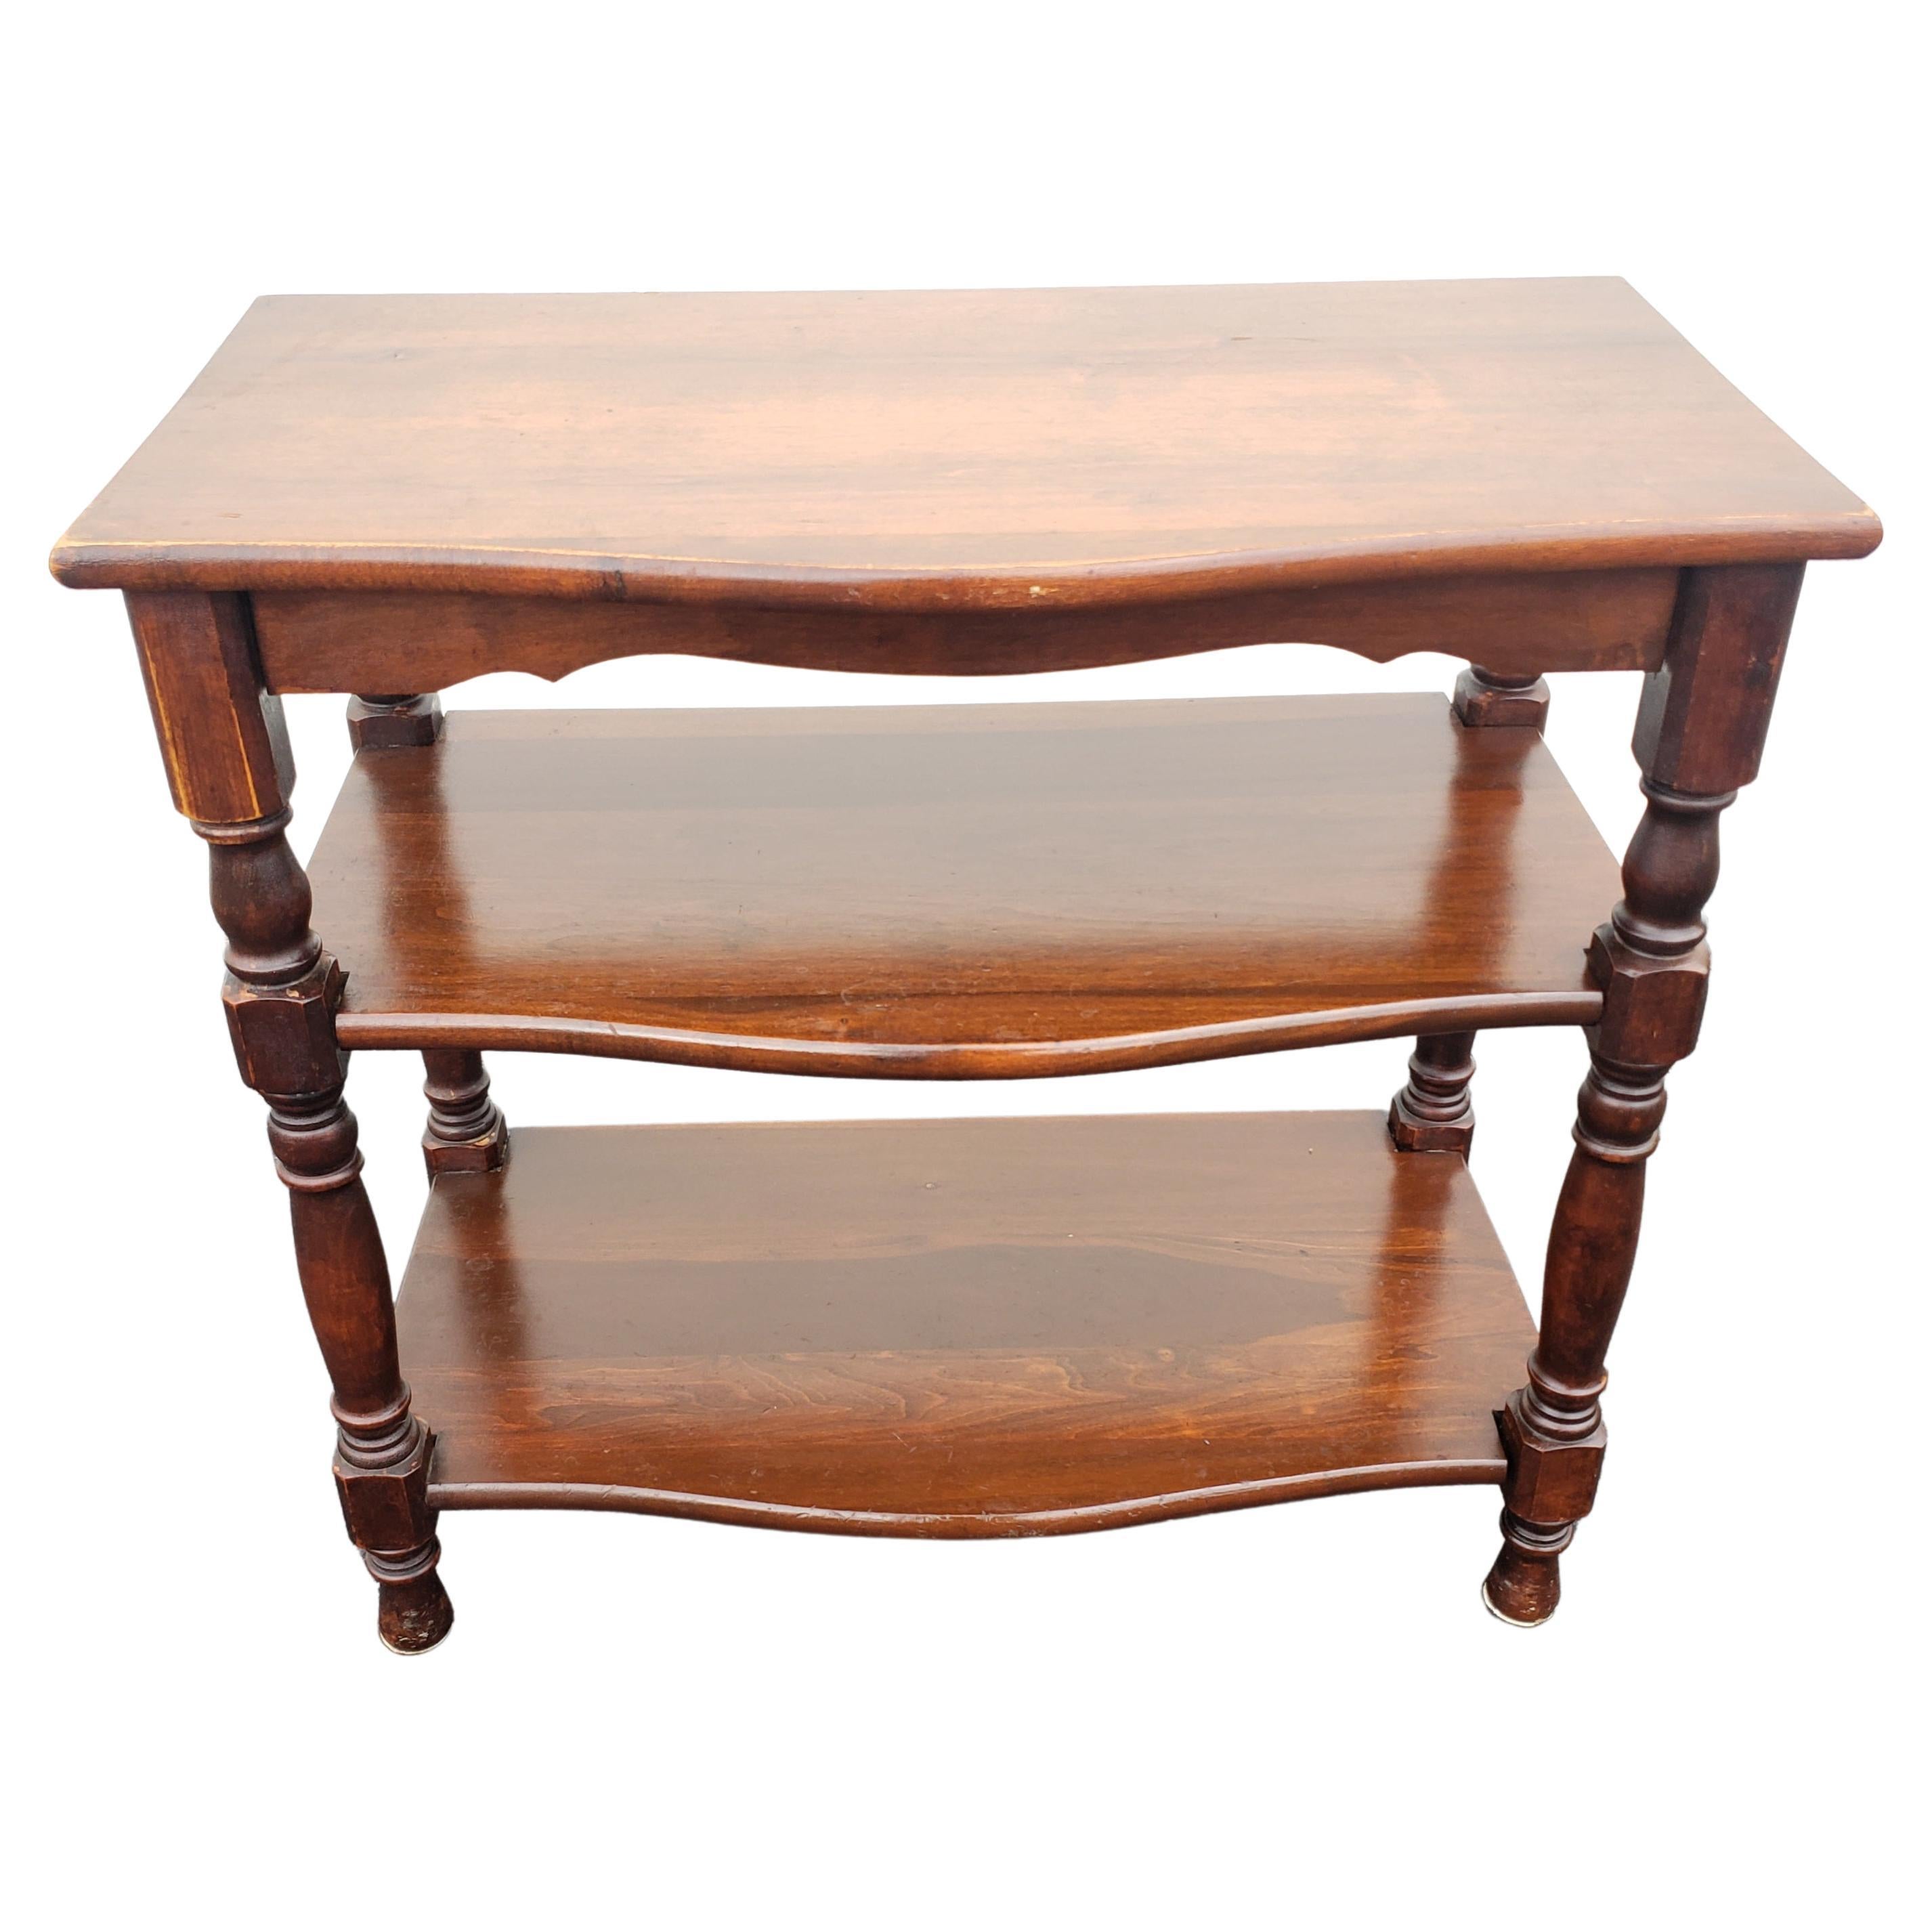 We are pleased to offer this beautiful vintage American classical versatile piece of furniture. Multiple use from Server / console table / bookshelf, to etagere from 1960s. It is basically usable in any room in home.
This gem is made of Mahogany